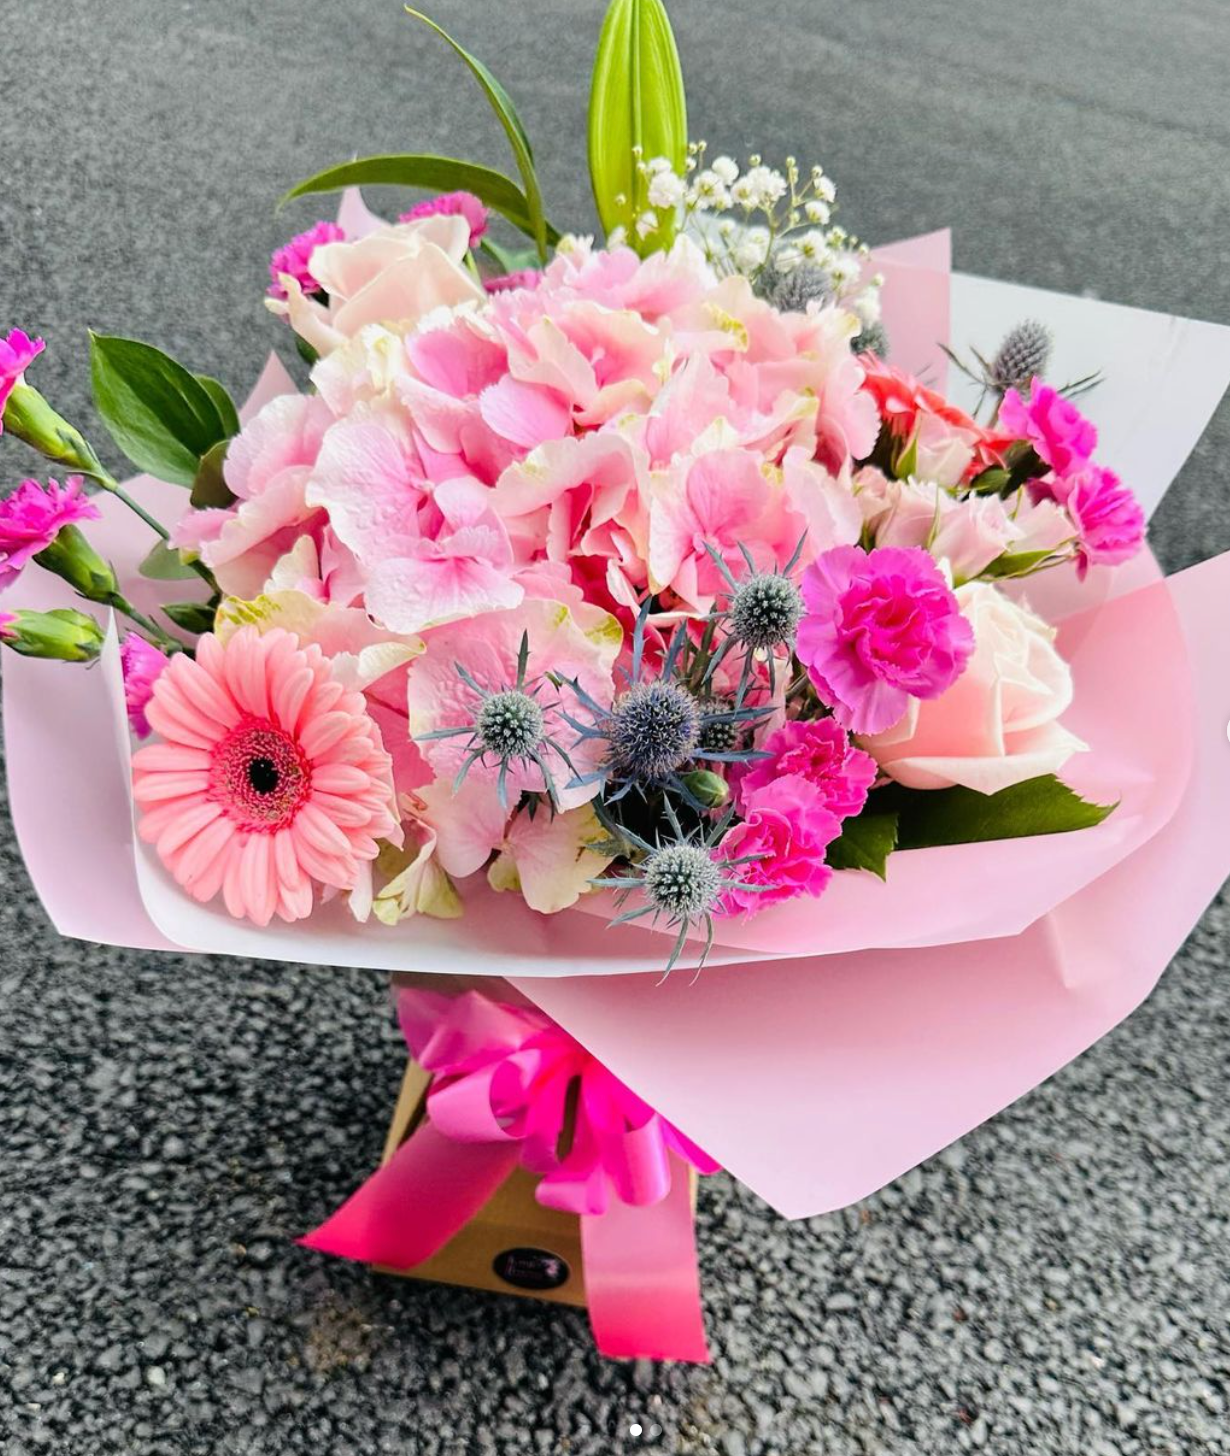 Flower Bouquet Presented in Small Box